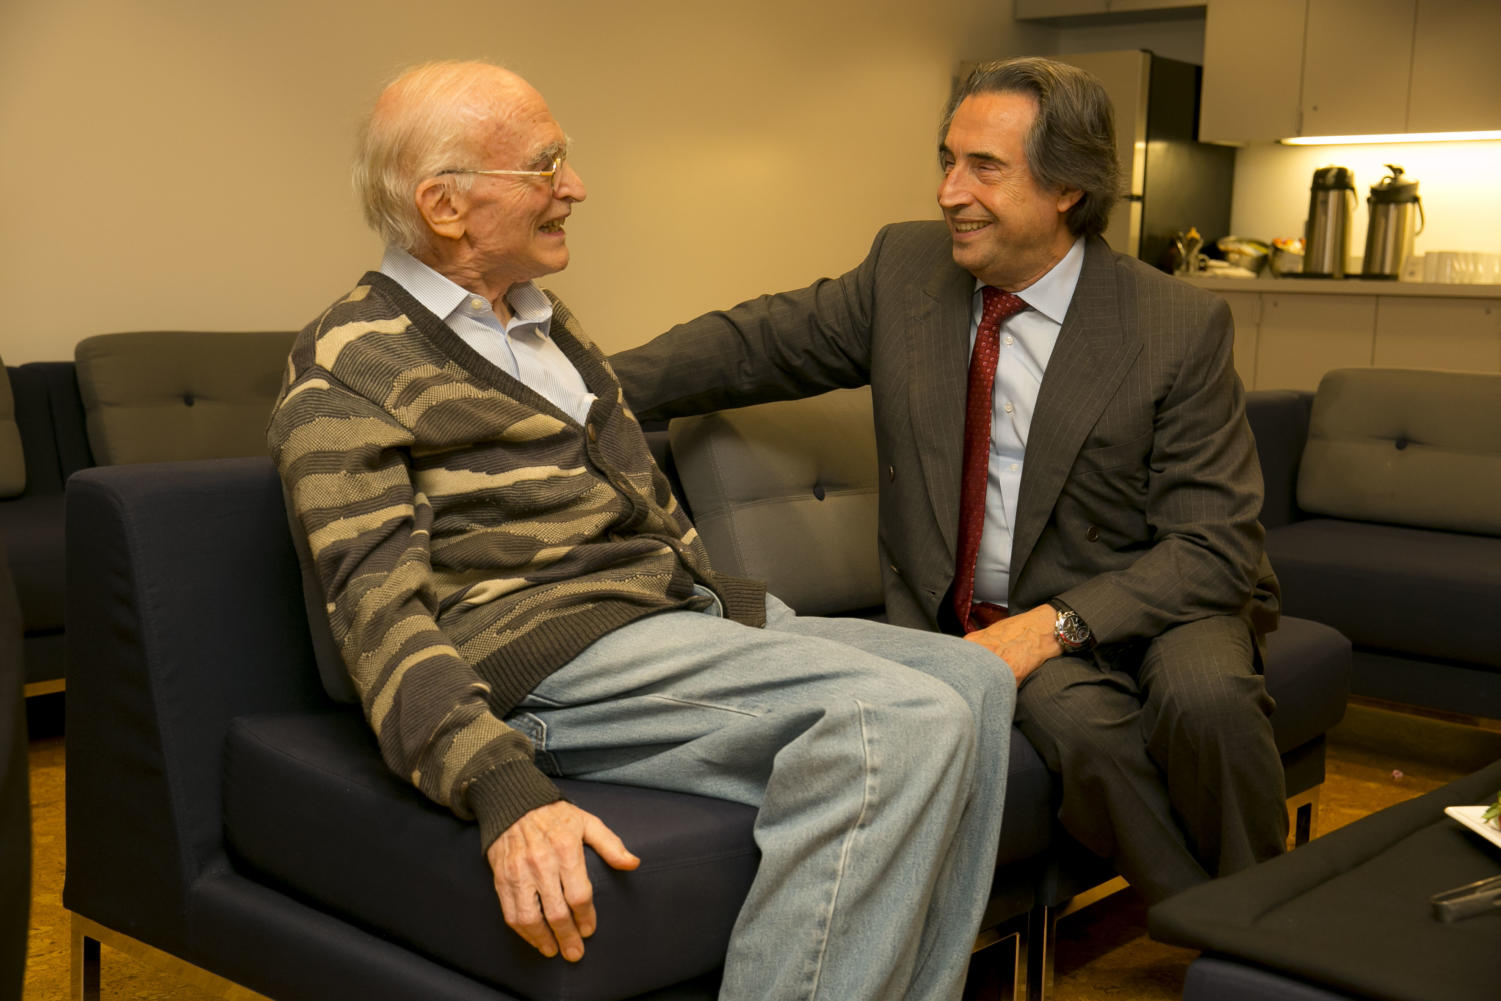 Gossett with CSO Zell Music Director Riccardo Muti backstage at the Logan Center, after Muti's appearance on campus September 21, 2015.